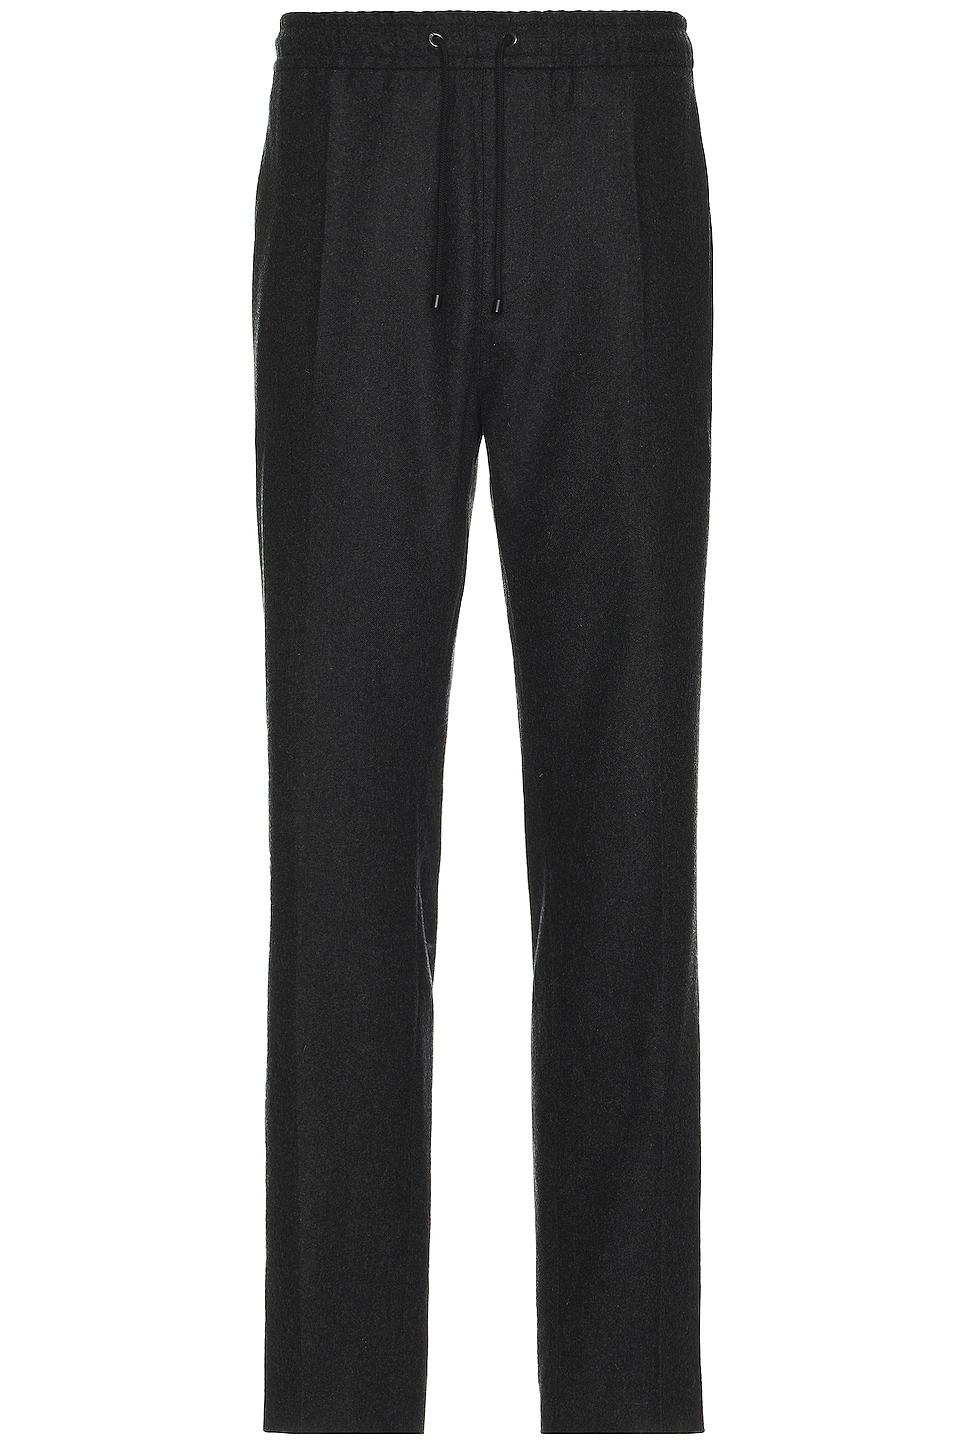 Image 1 of FRAME Modern Travel Pants in Charcoal Grey